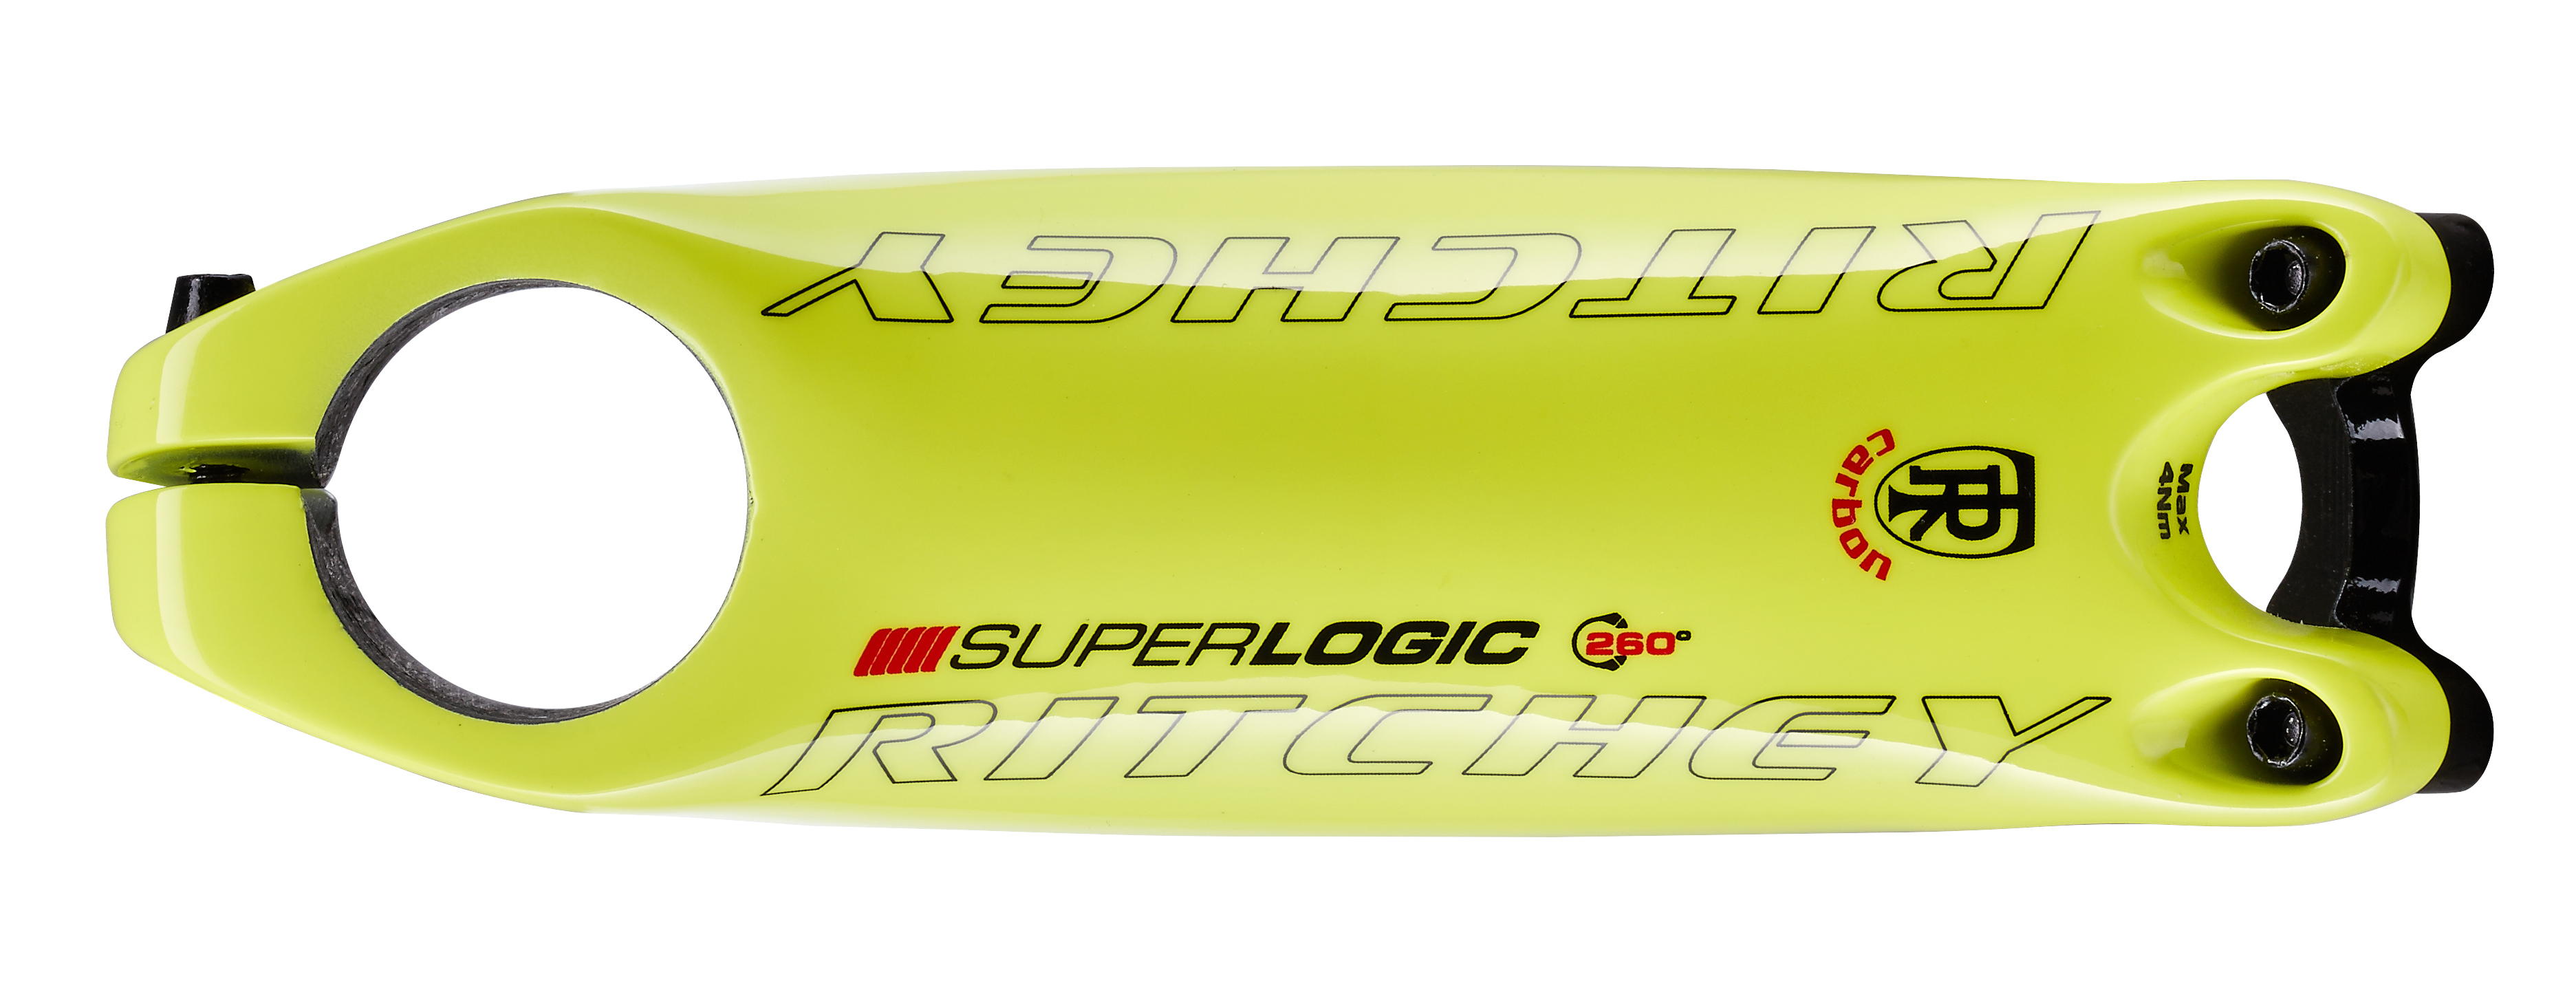 Ritchey Introduces Limited Edition SuperLogic C260 High-Vis Yellow